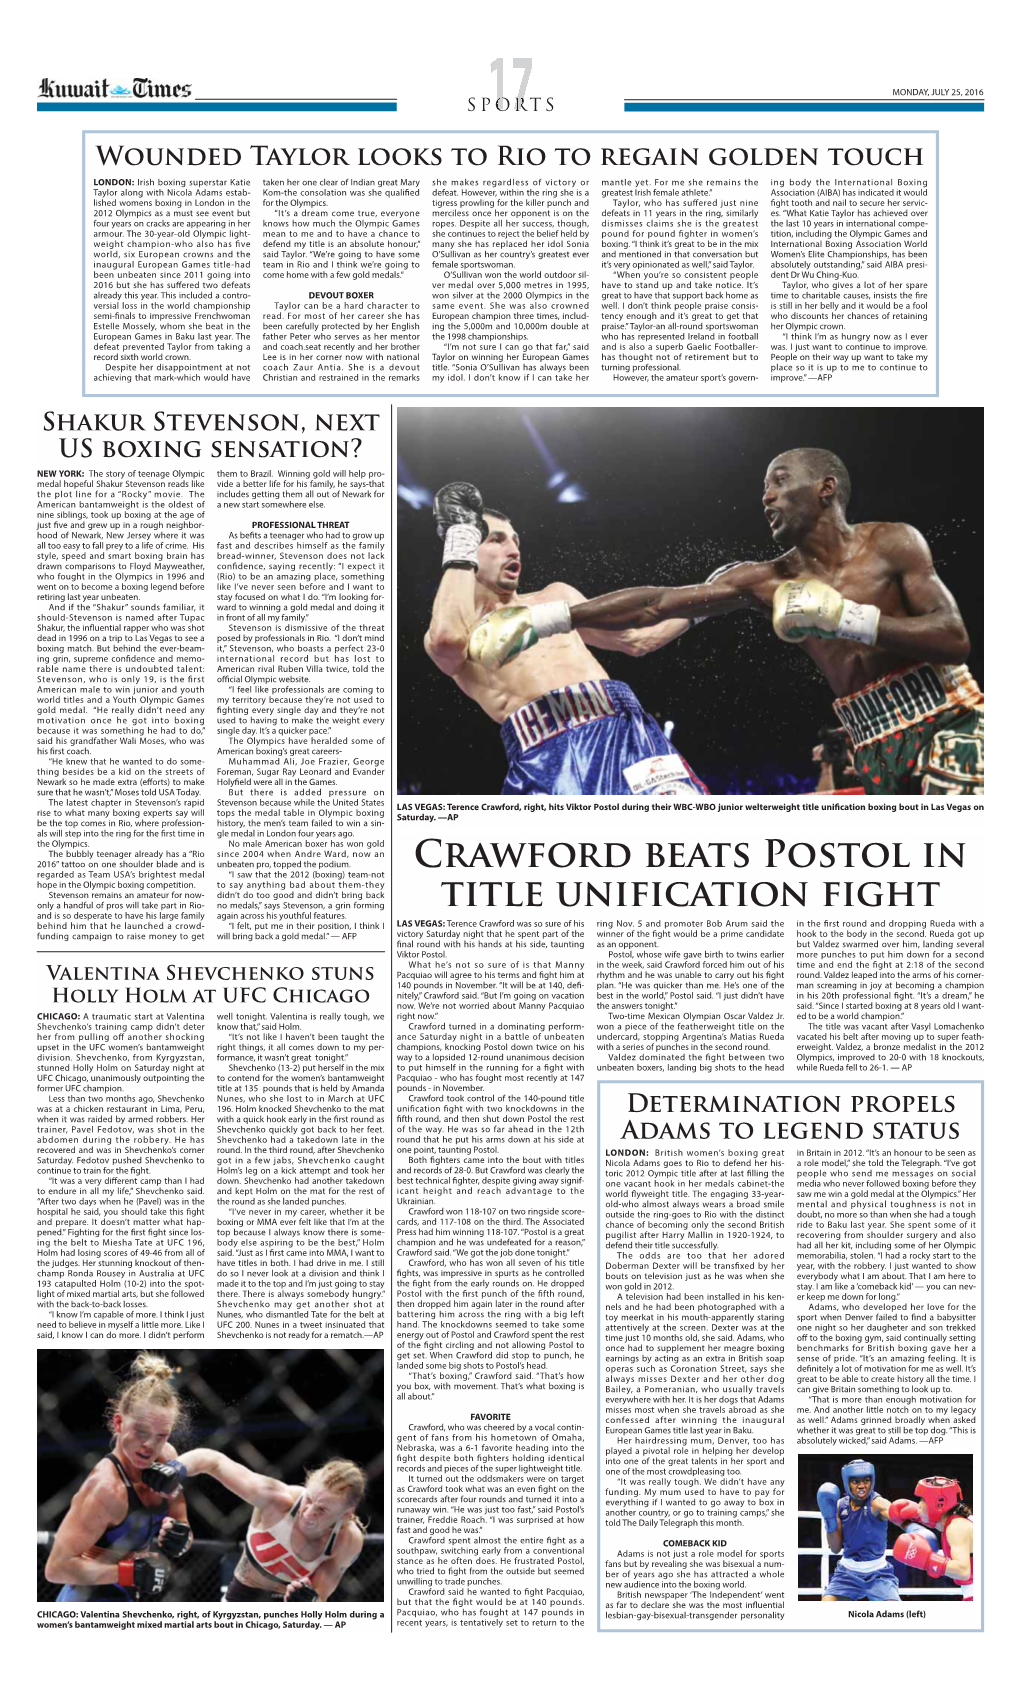 Crawford Beats Postol in Title Unification Fight